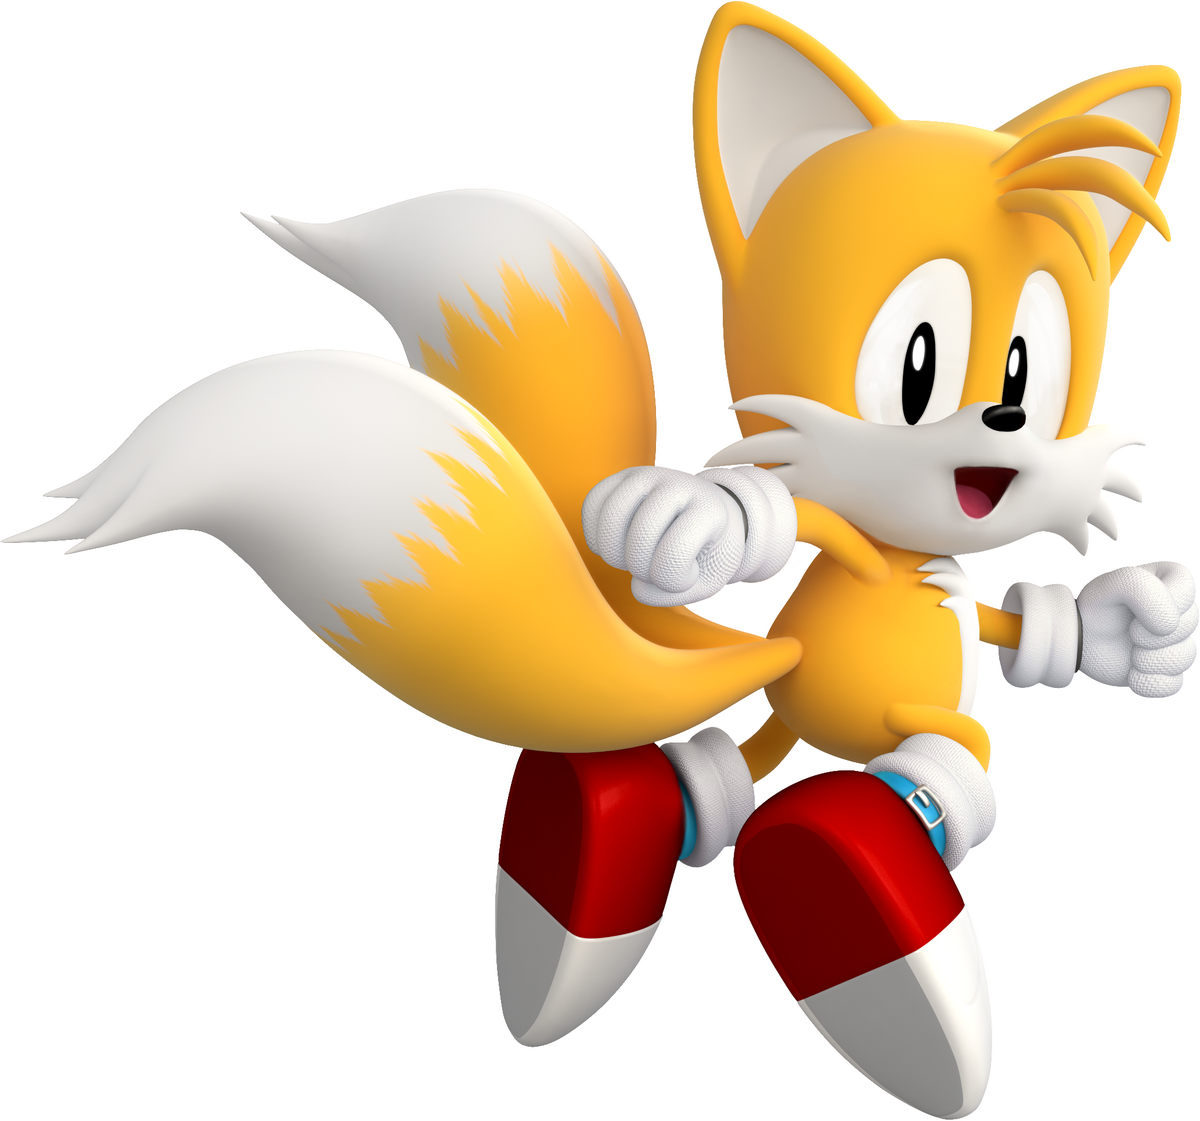 the sky's the limit — sonic and tails? It's pure chaos!